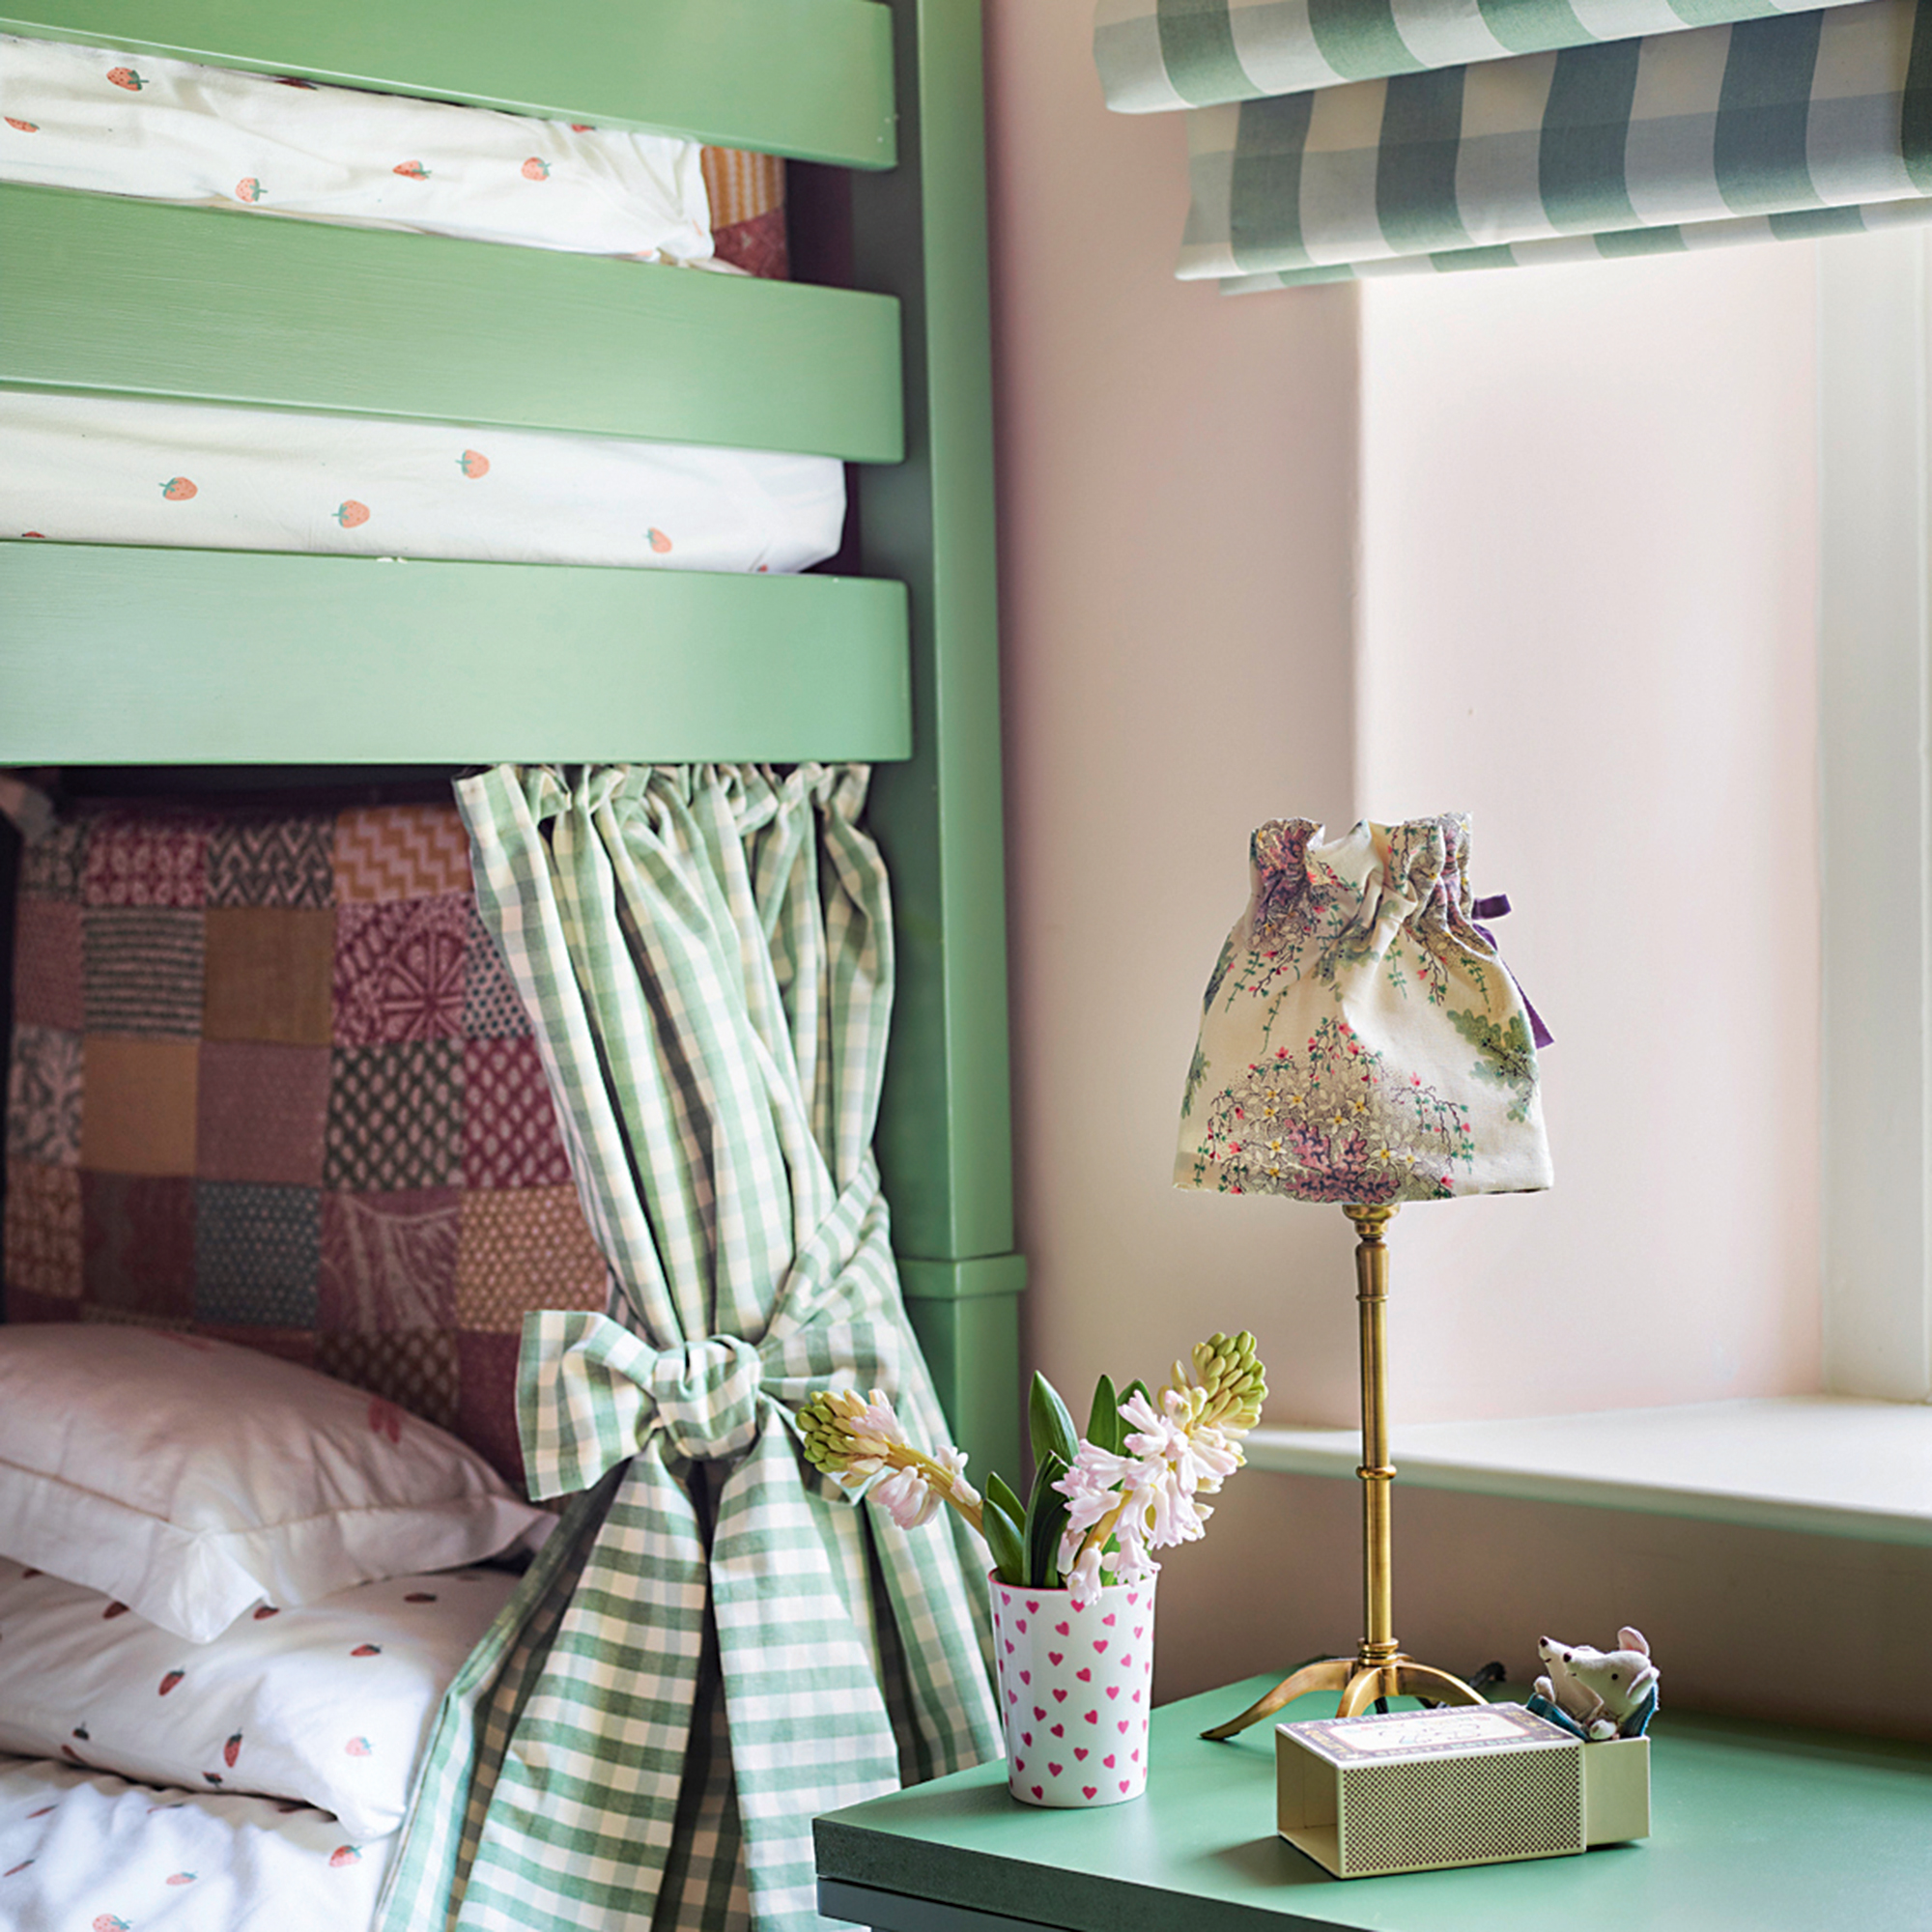 green painted bunk bed and desk with green gingham blind and curtains in children's room